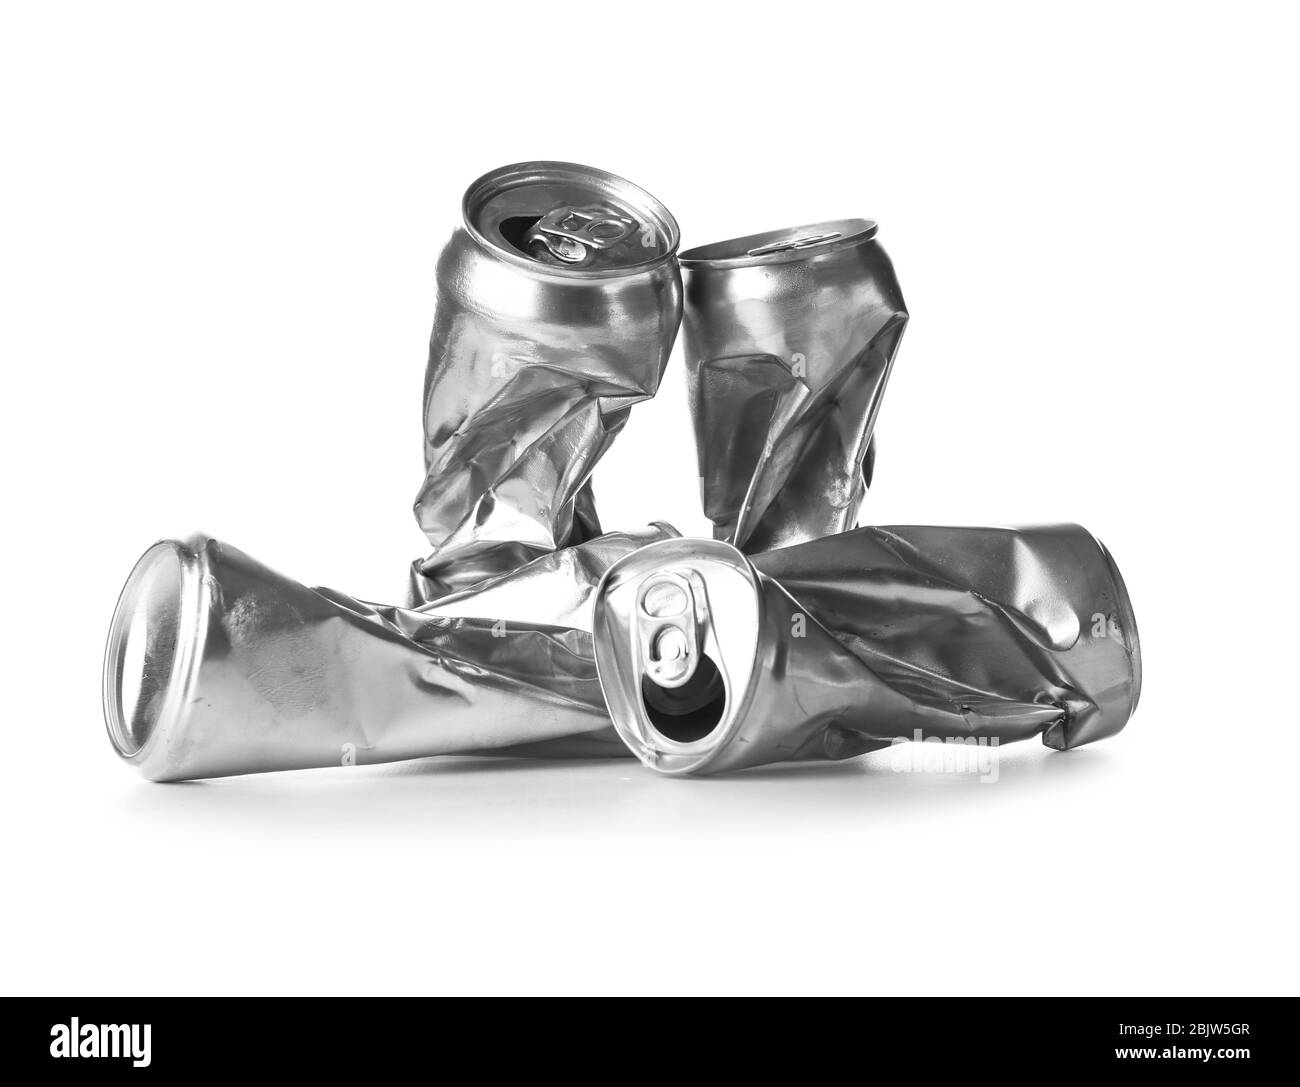 Crumpled tin cans on white background Stock Photo